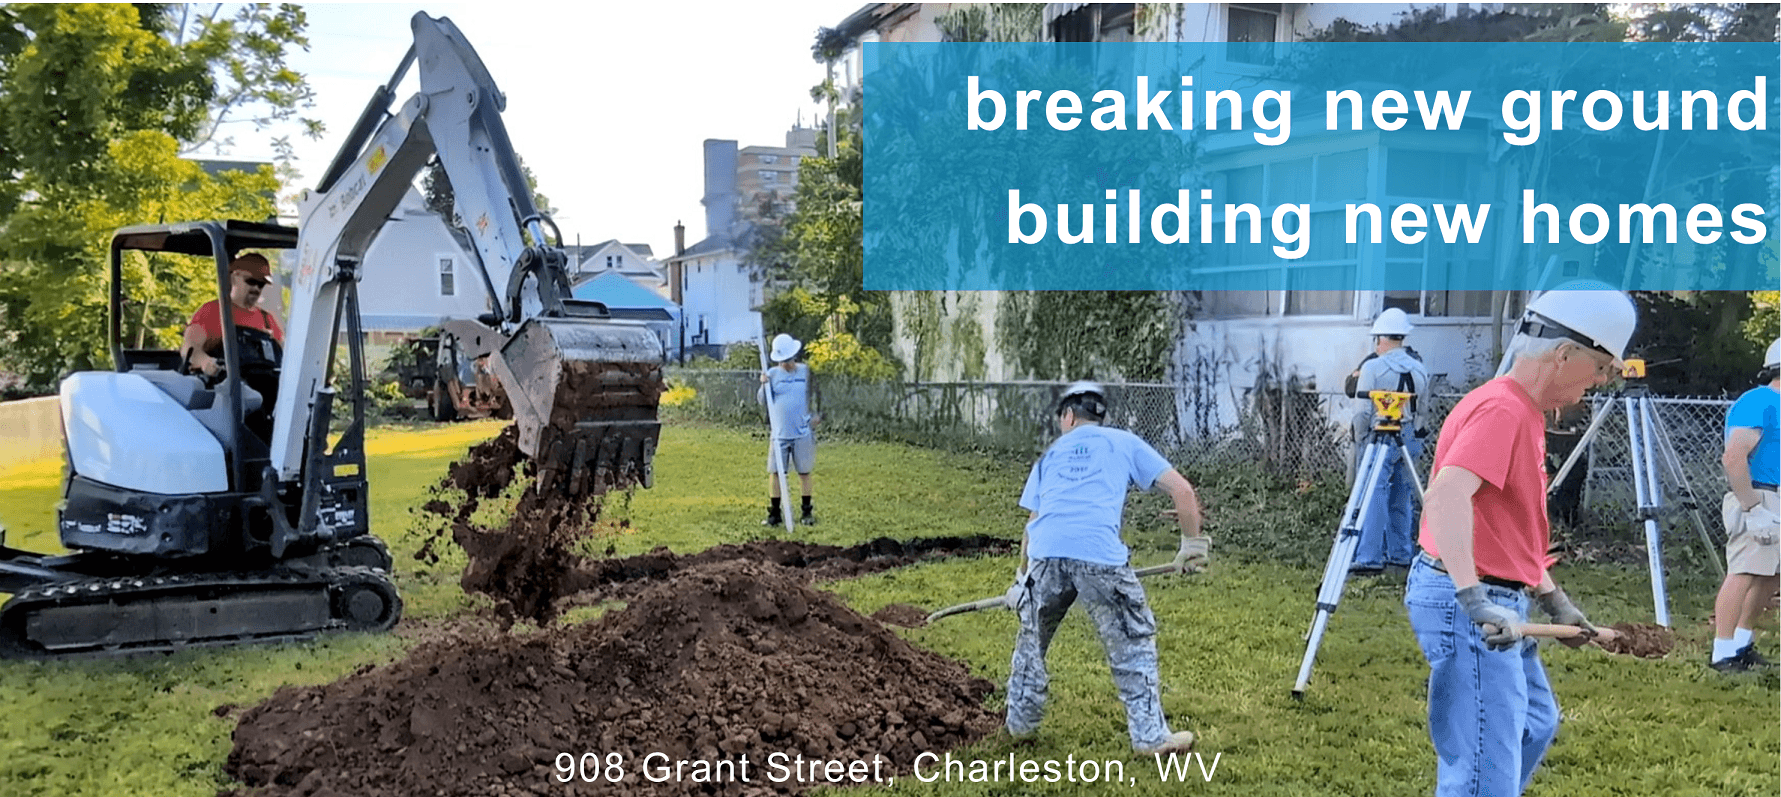 Discover the latest efforts by Habitat for Humanity of Kanawha & Putnam as we kick off the construction of a new home at 908 Grant Street. 